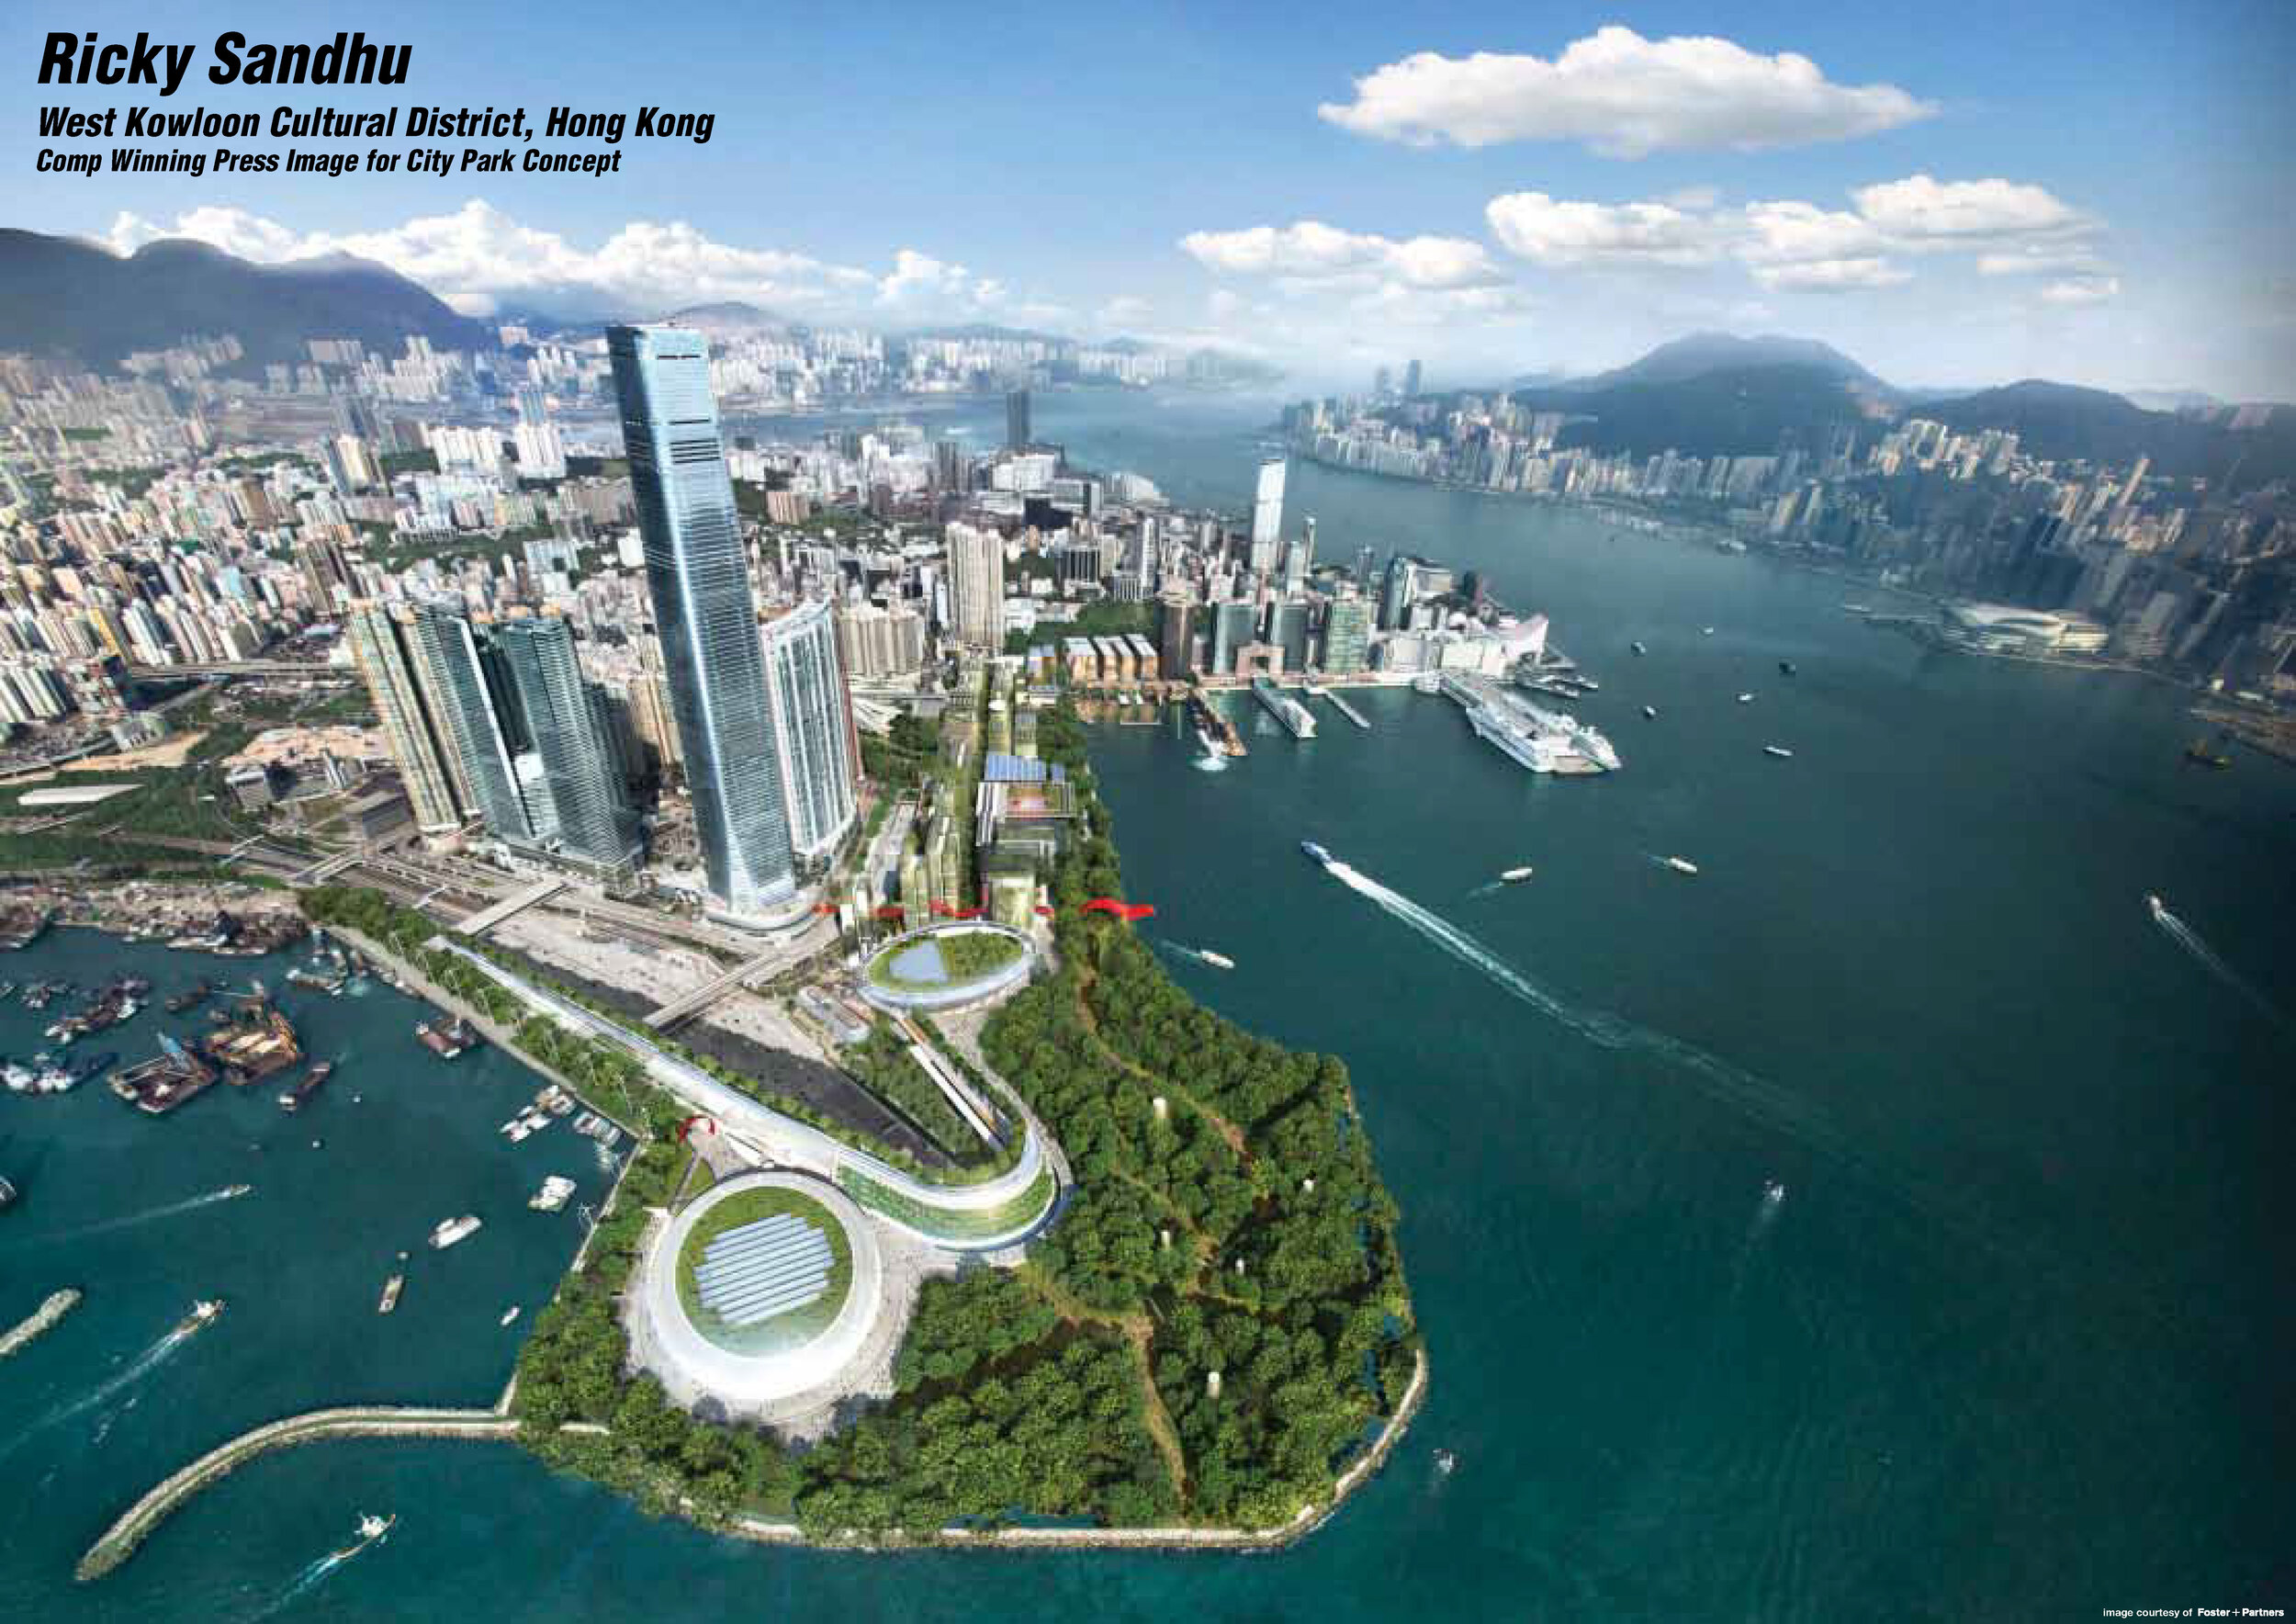 West Kowloon Cultural District, Hong Kong (Foster + Partners)